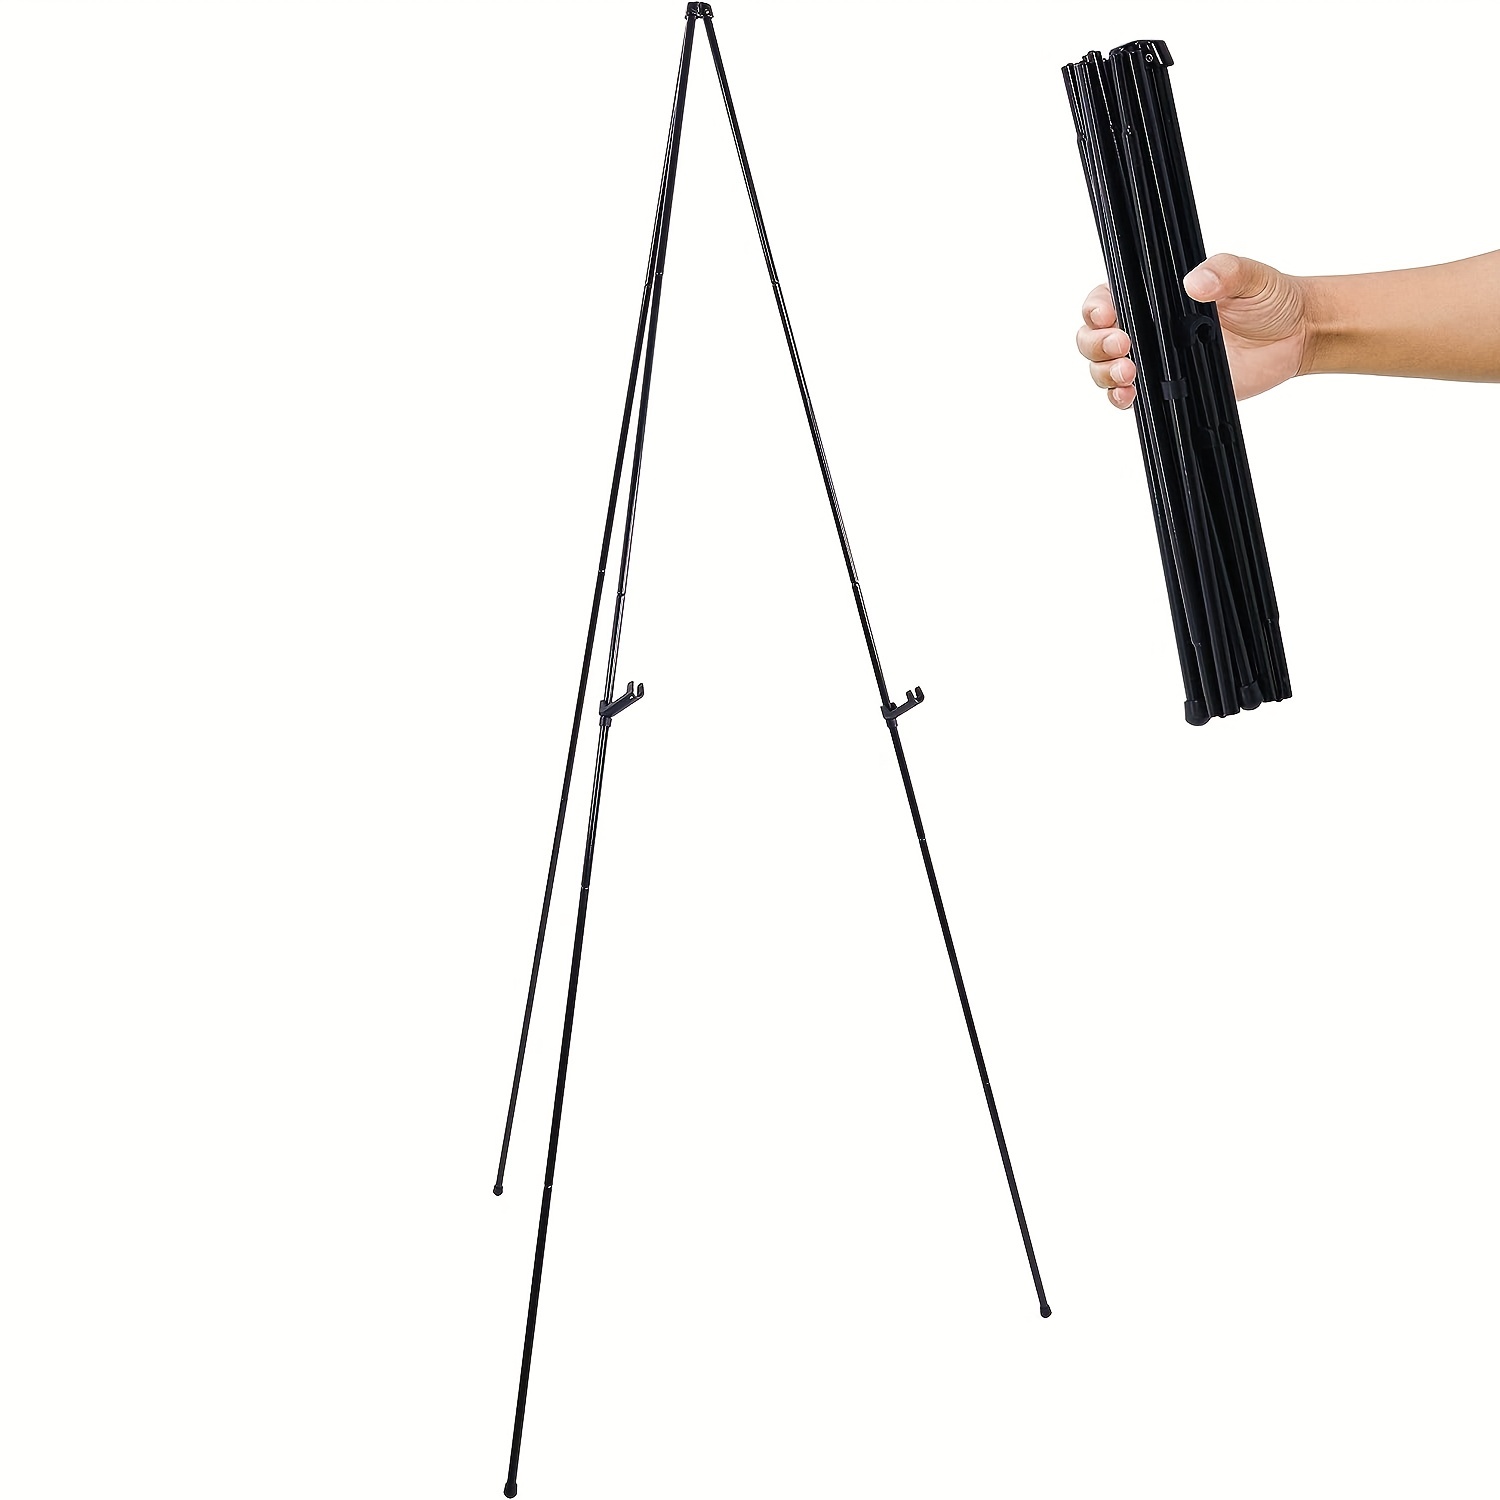 xinxintai Portable Artist Easel Stand 63 Inches - Black Picture Stand Painting Easel - Table Top Art Drawing Easels for Painting Canvas, Wedding Signs